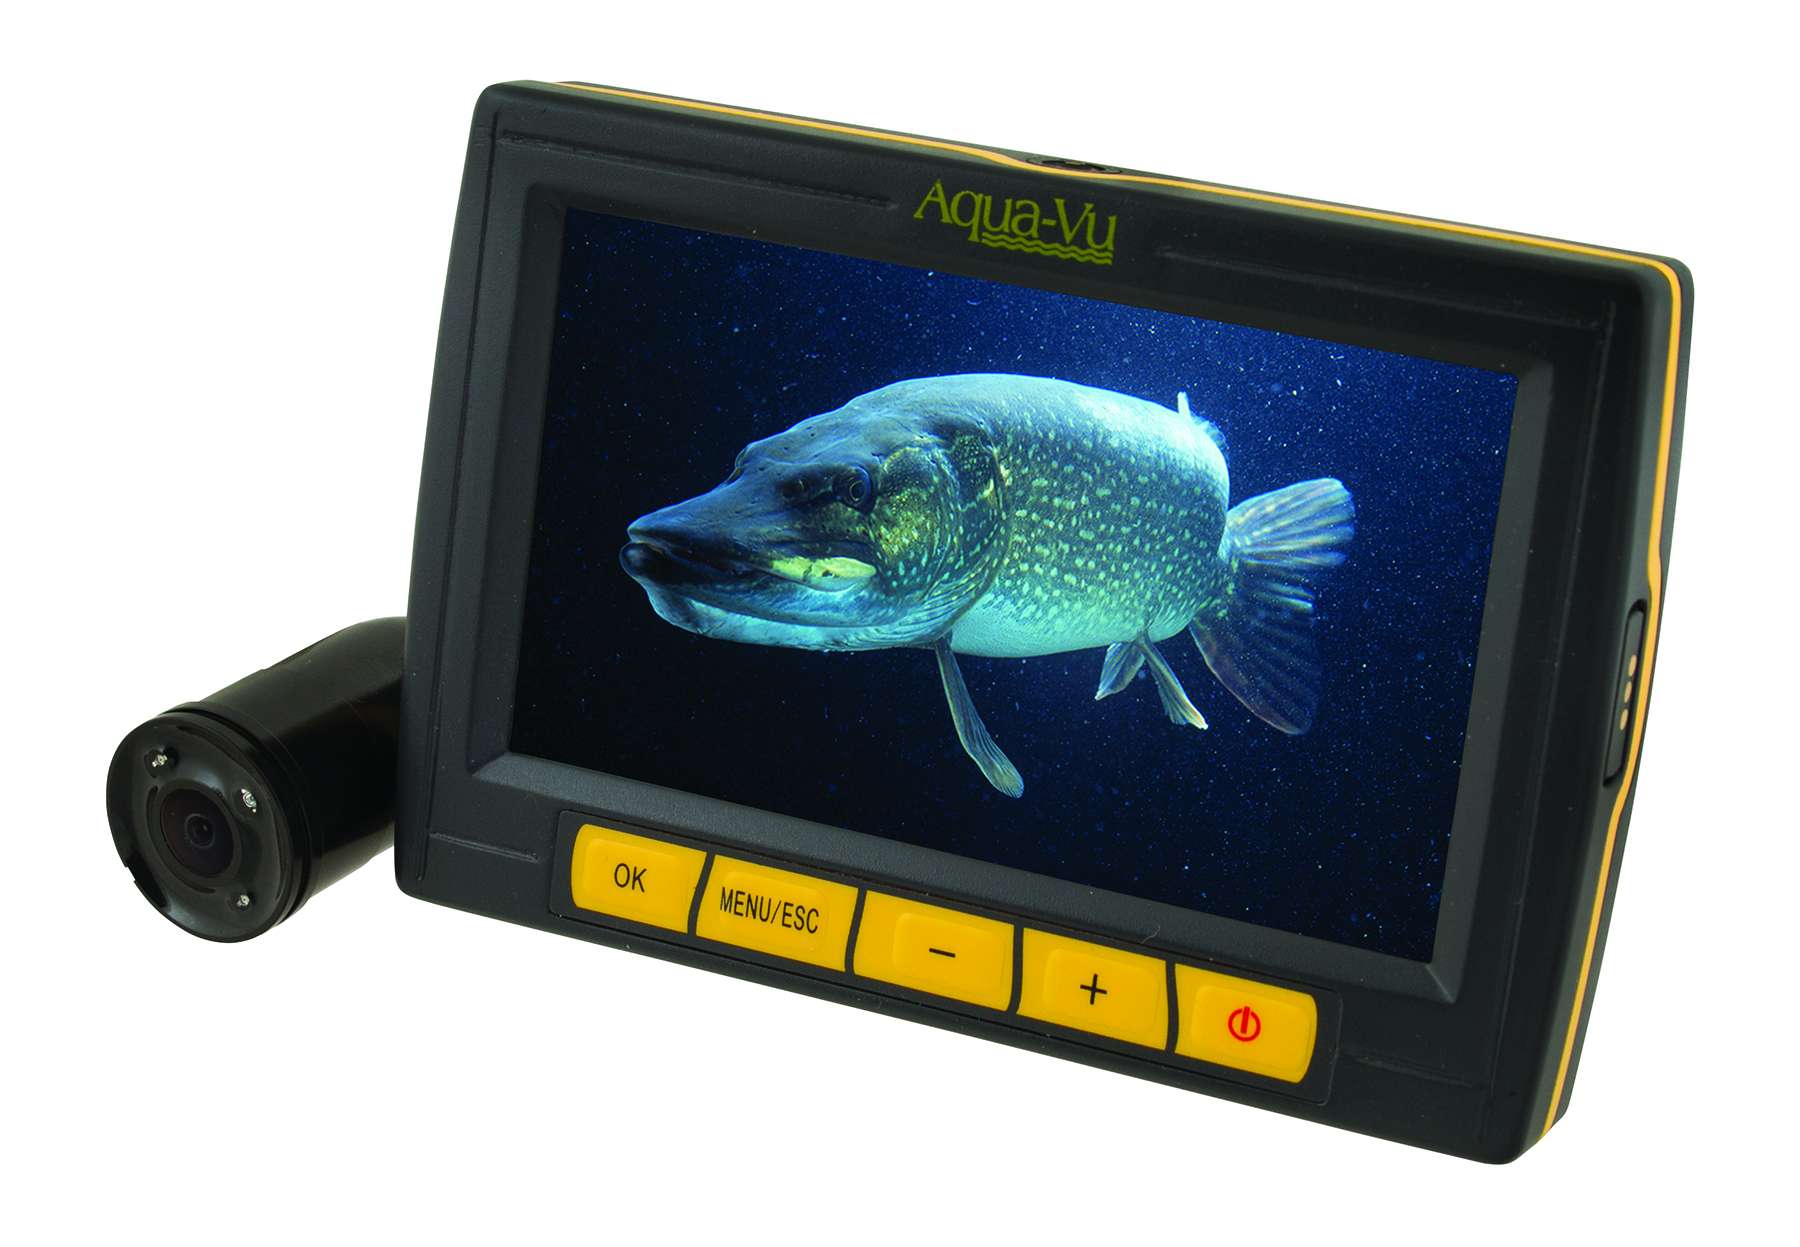 Micro Stealth 4.3<br> 
Aqua-Vu<br>	
$229.99<br>
Major value and breathtaking live underwater video come together in one ultra-portable, easy- to-use underwater viewing system. The micro Stealth comes complete with a 4.3-inch high-resolution color LCD connected to 50-feet of reinforced cable and a super stealthy microÂ® underwater camera. State of the art viewscreen and camera optics deliver the sharpest, clearest, most colorful underwater image available in an economically priced viewing system. The magnetic battery charger assures the whole system is IP67 waterproof. Micro camera system includes clip-on ballast weight and two separate, adjustable viewing fins for trolling/drifting and for ice fishing. Internal Lithium-ion battery powers the micro camera system for up to five hours. 		